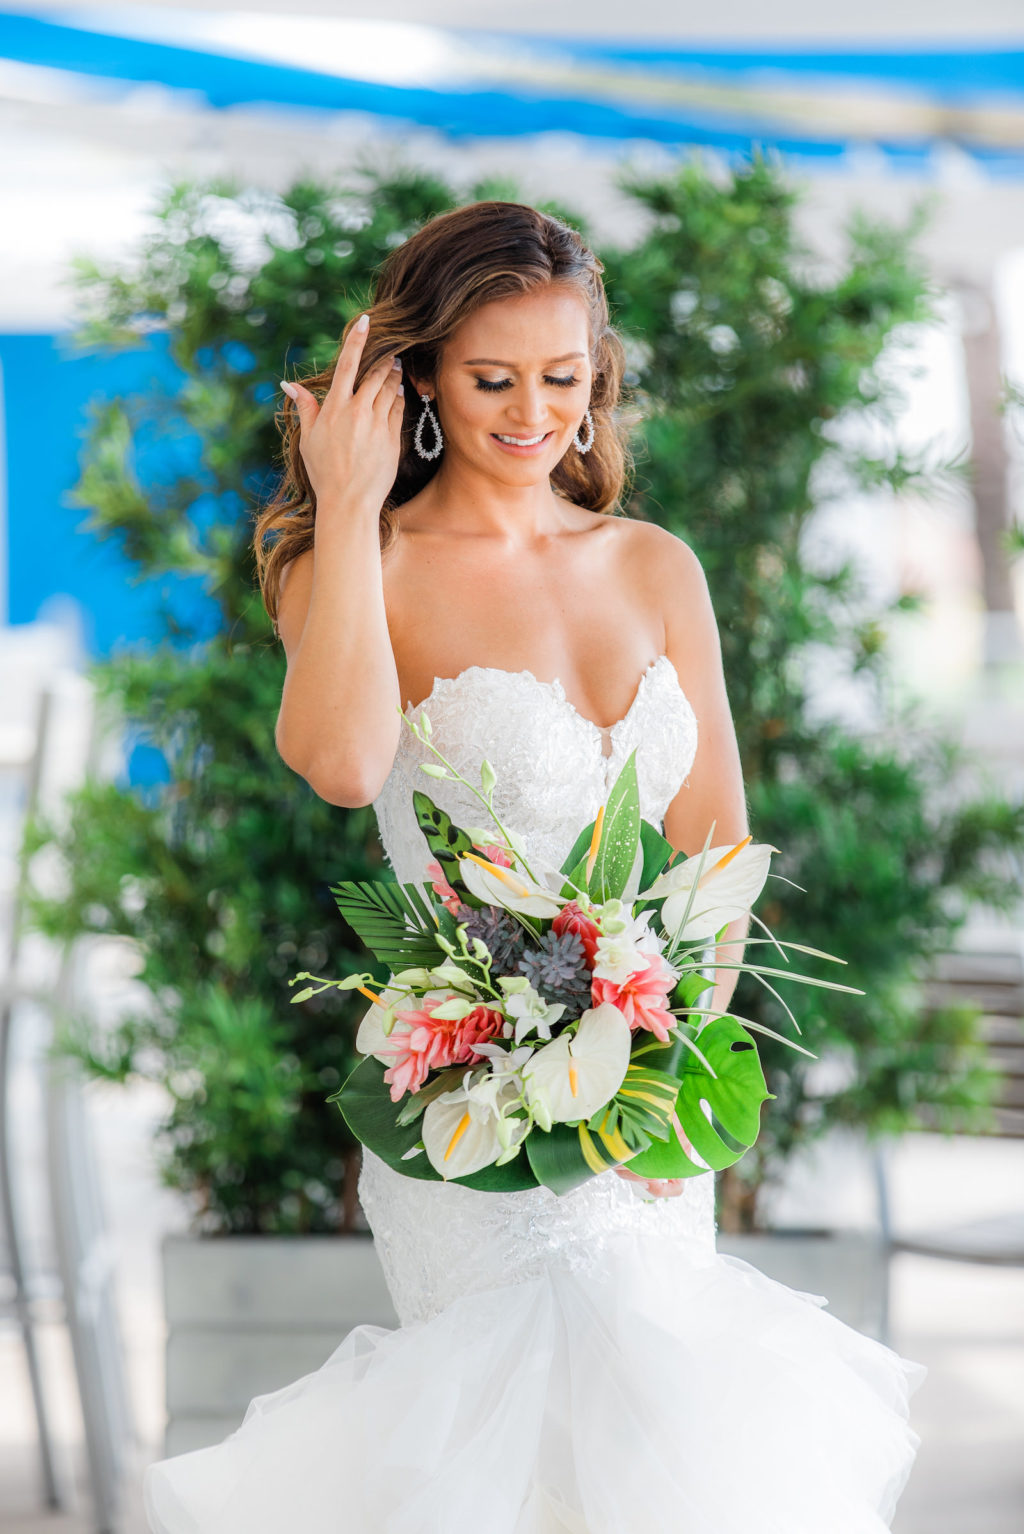 Tampa Bride in Beaded Lace Sweetheart Neckline Mermaid Wedding Dress Holding Tropical Pink Ginger, White Anthuriums, Monstera Leaves Floral Bouquet | Wedding Florist Iza's Flowers